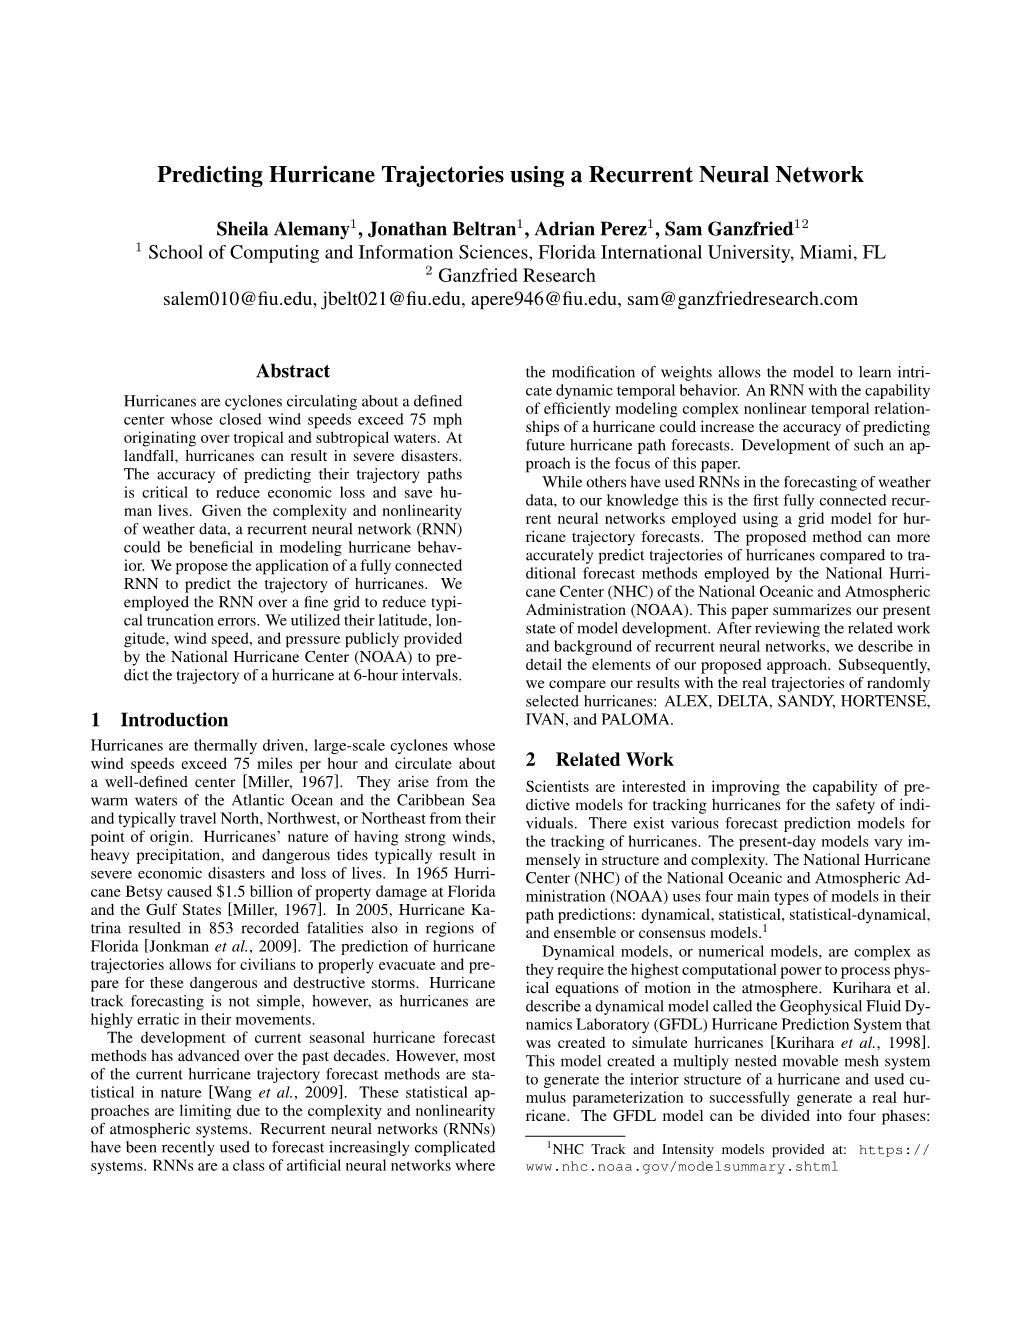 Predicting Hurricane Trajectories Using a Recurrent Neural Network